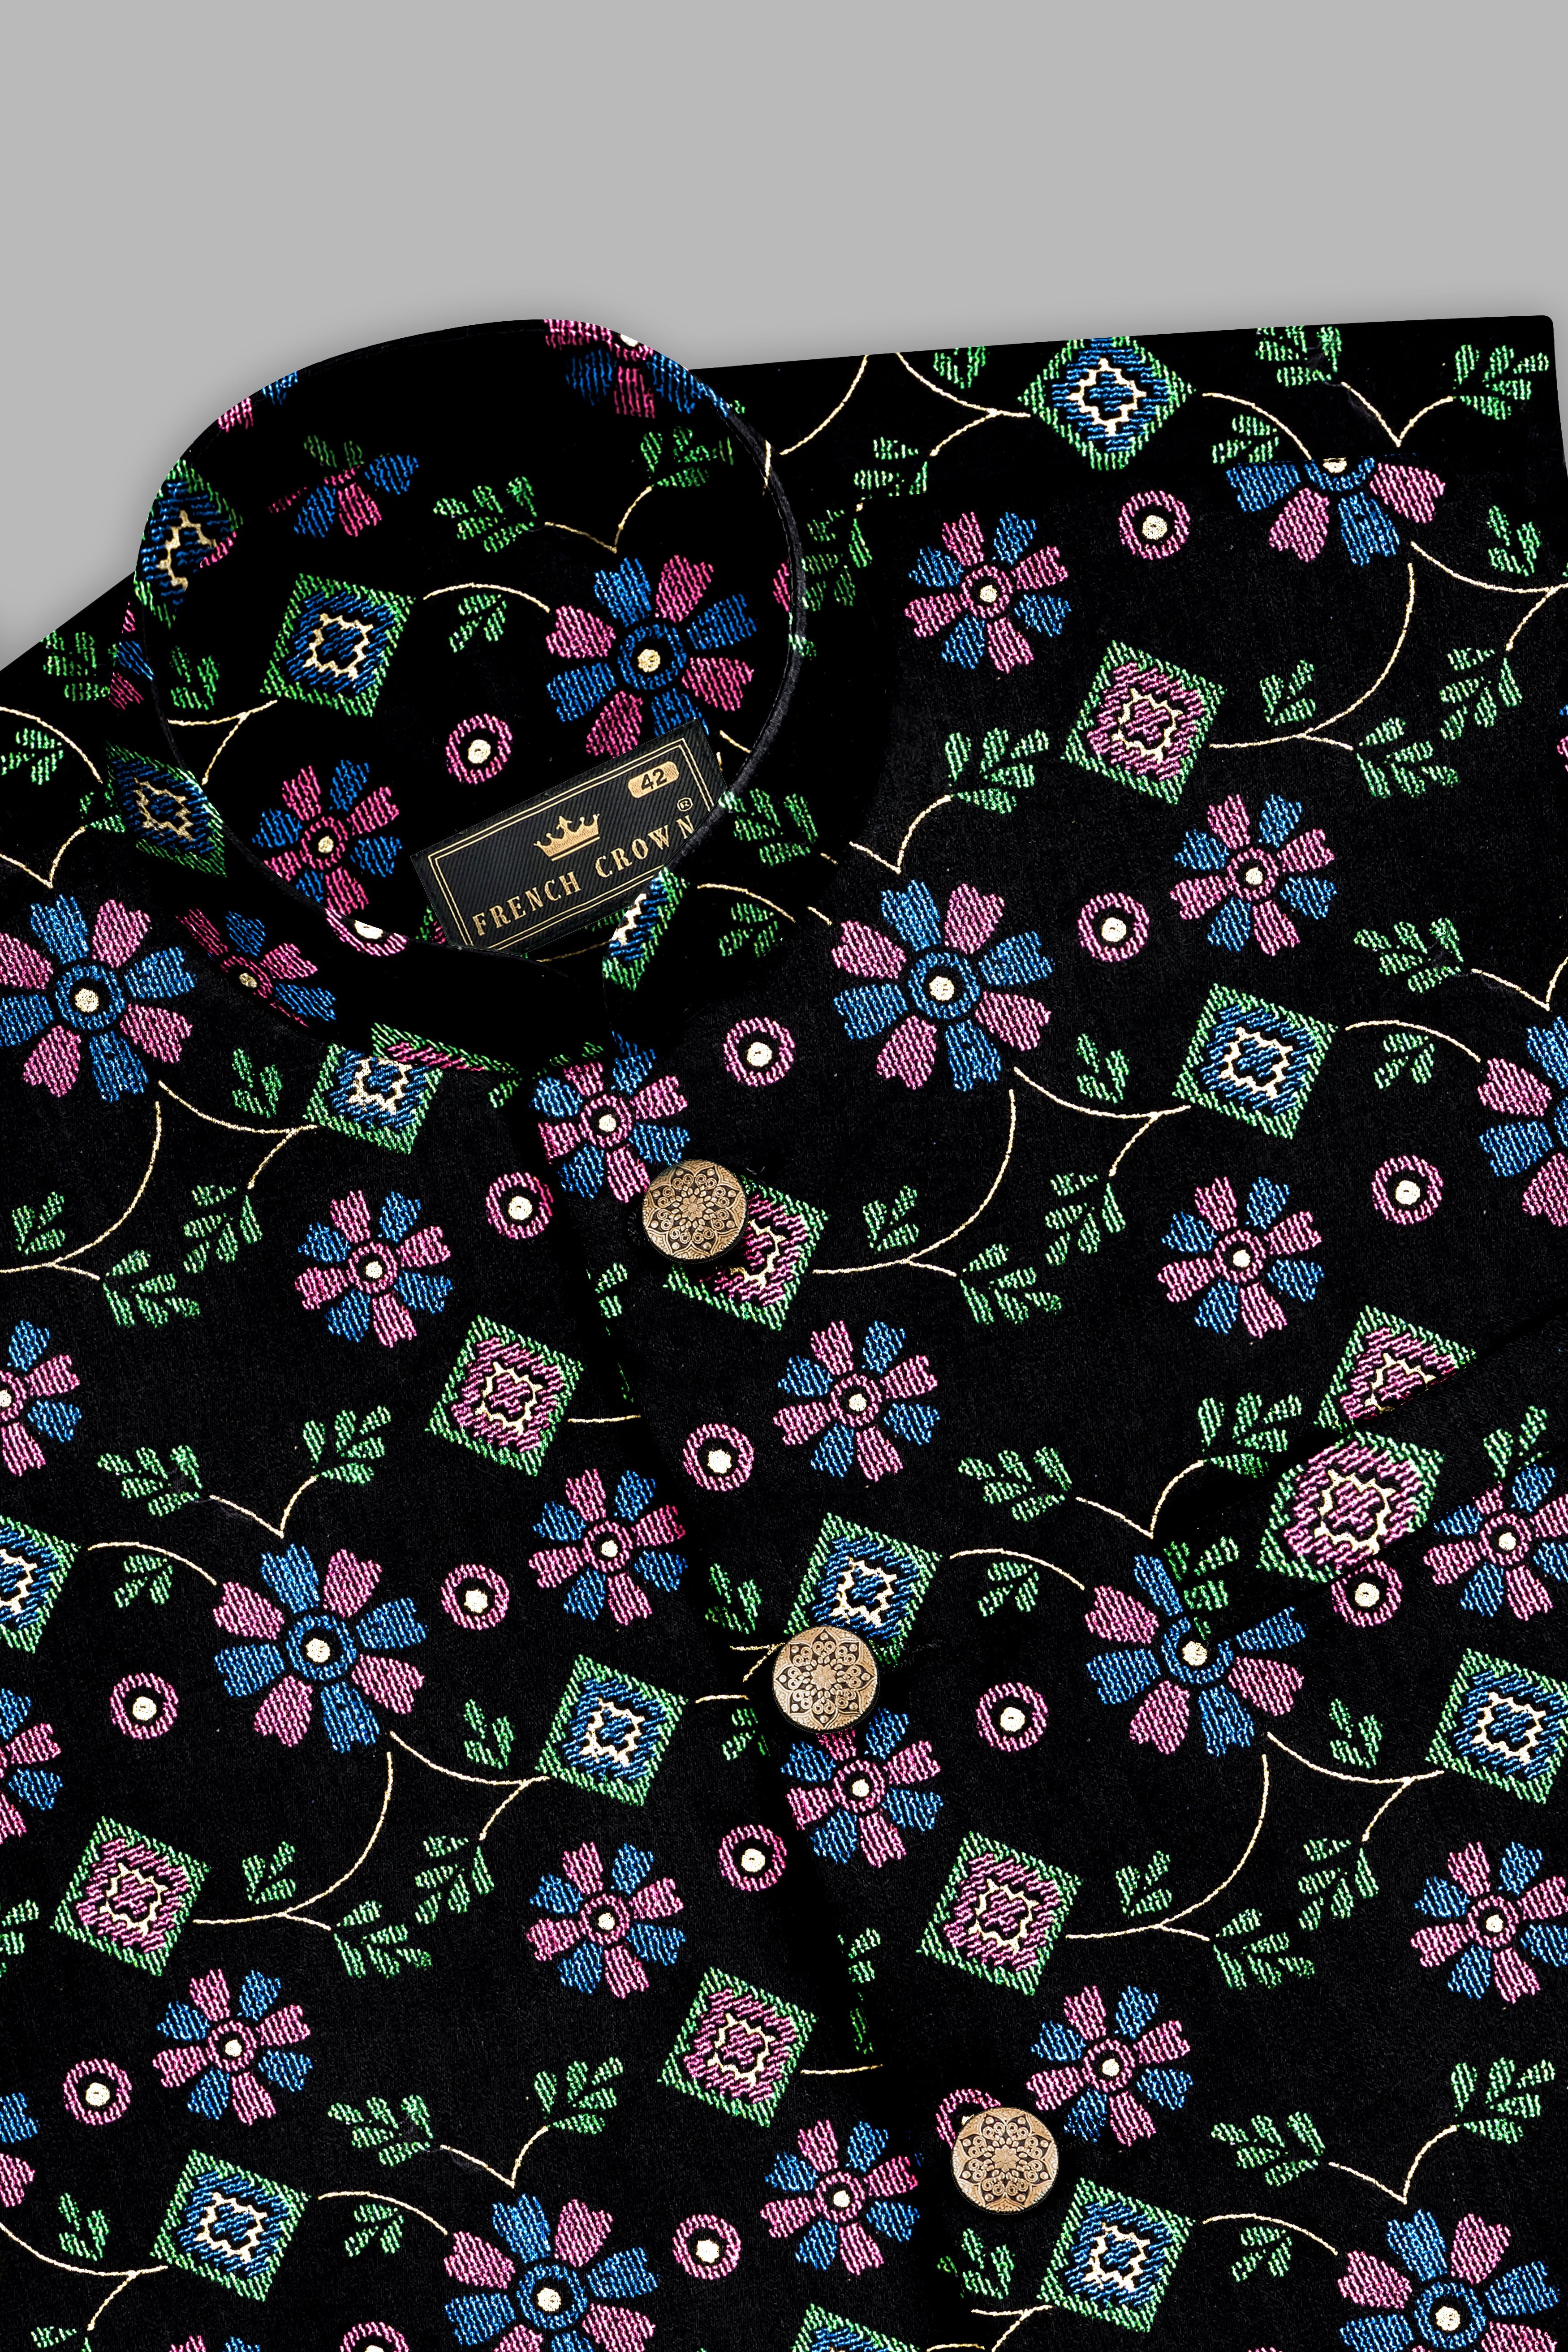 Jade Black and Glade Green Multicolour Floral Jacquard Weave Nehru Jacket WC3532-36,  WC3532-38,  WC3532-40,  WC3532-42,  WC3532-44,  WC3532-46,  WC3532-48,  WC3532-50,  WC3532-52,  WC3532-54,  WC3532-56,  WC3532-58,  WC3532-60